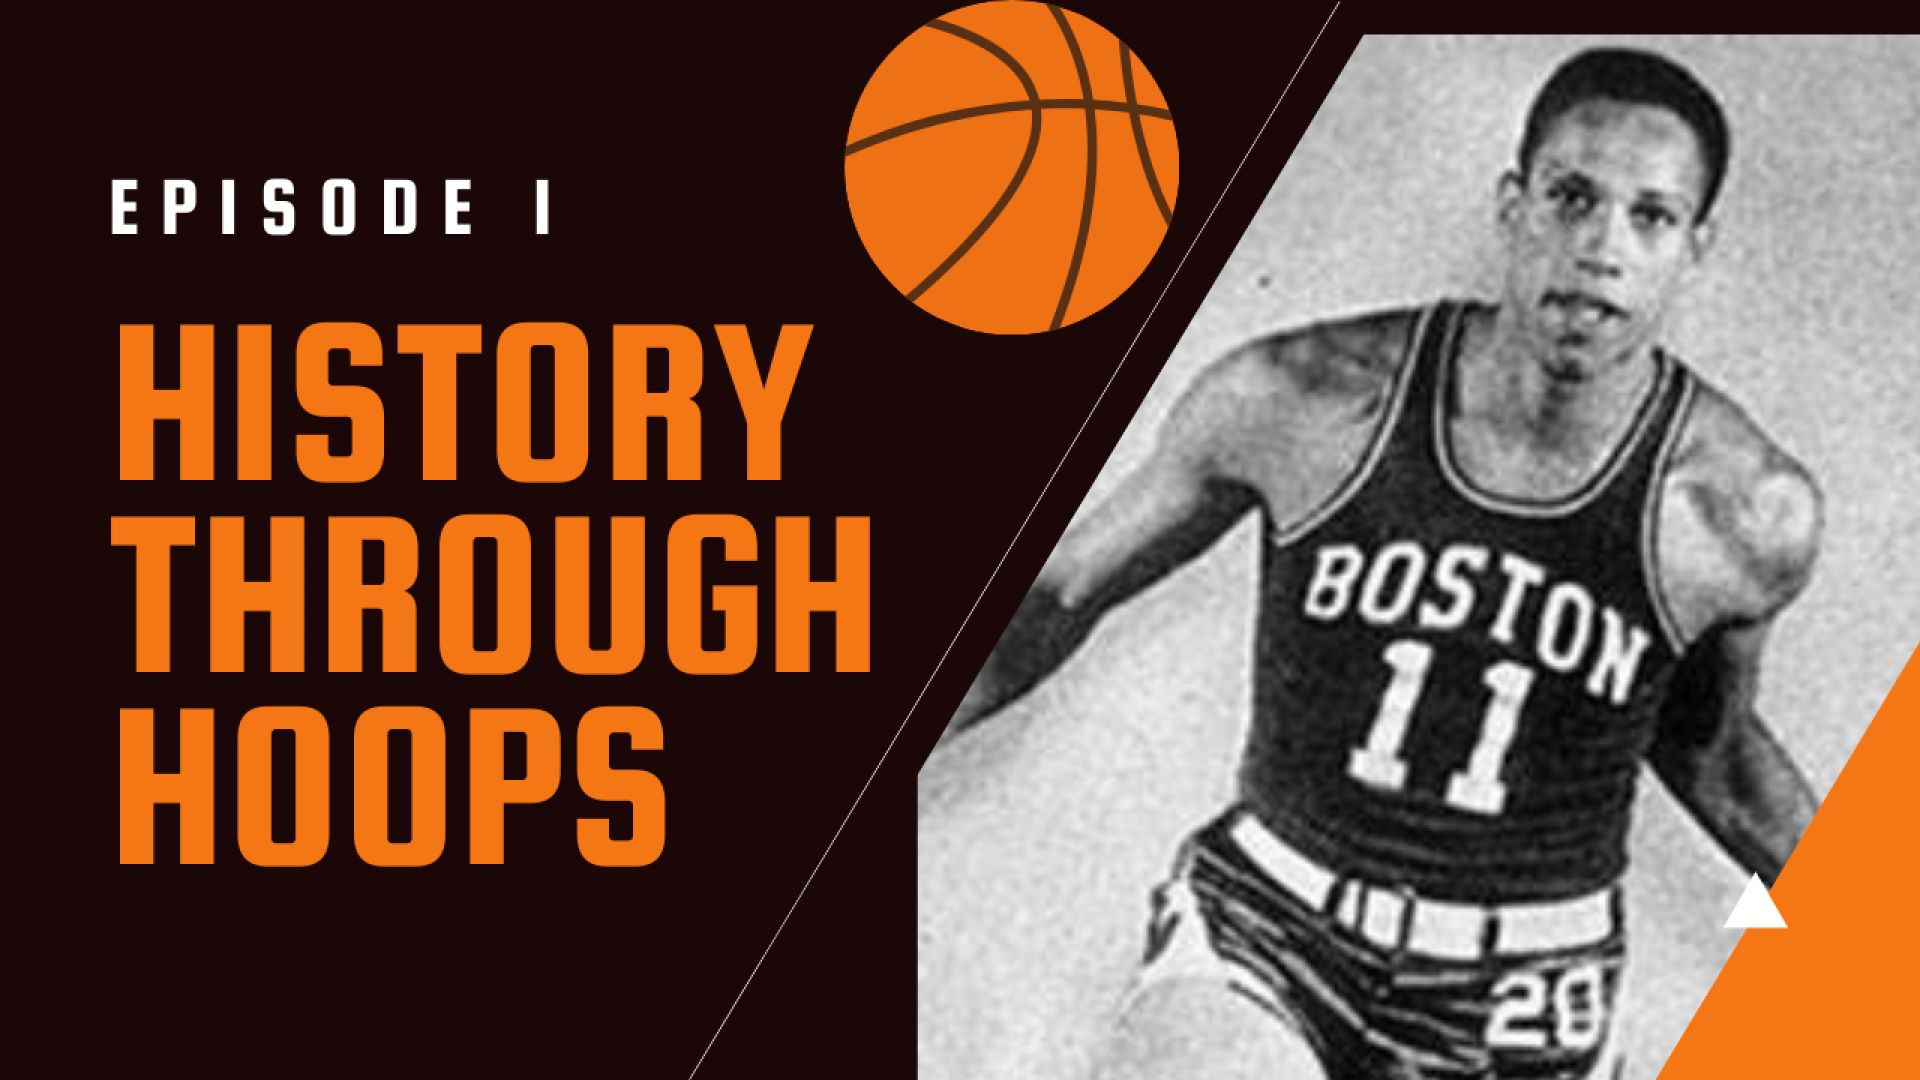 Chuck Cooper: The First Black Player to be drafted into the NBA